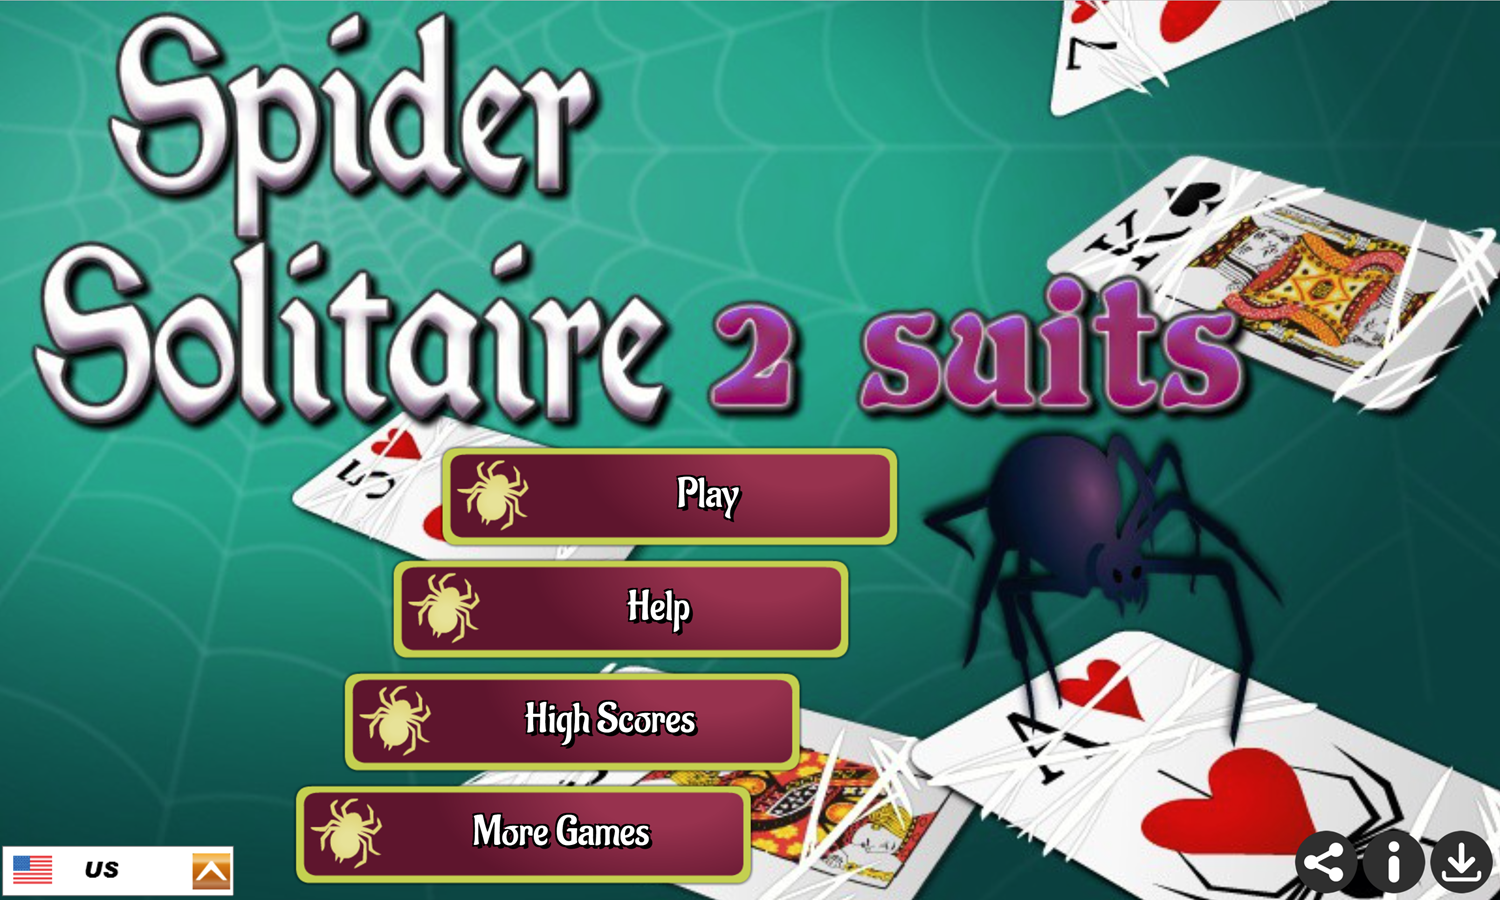 2 Suits Spider Solitaire Game Welcome Screen Screenshot.